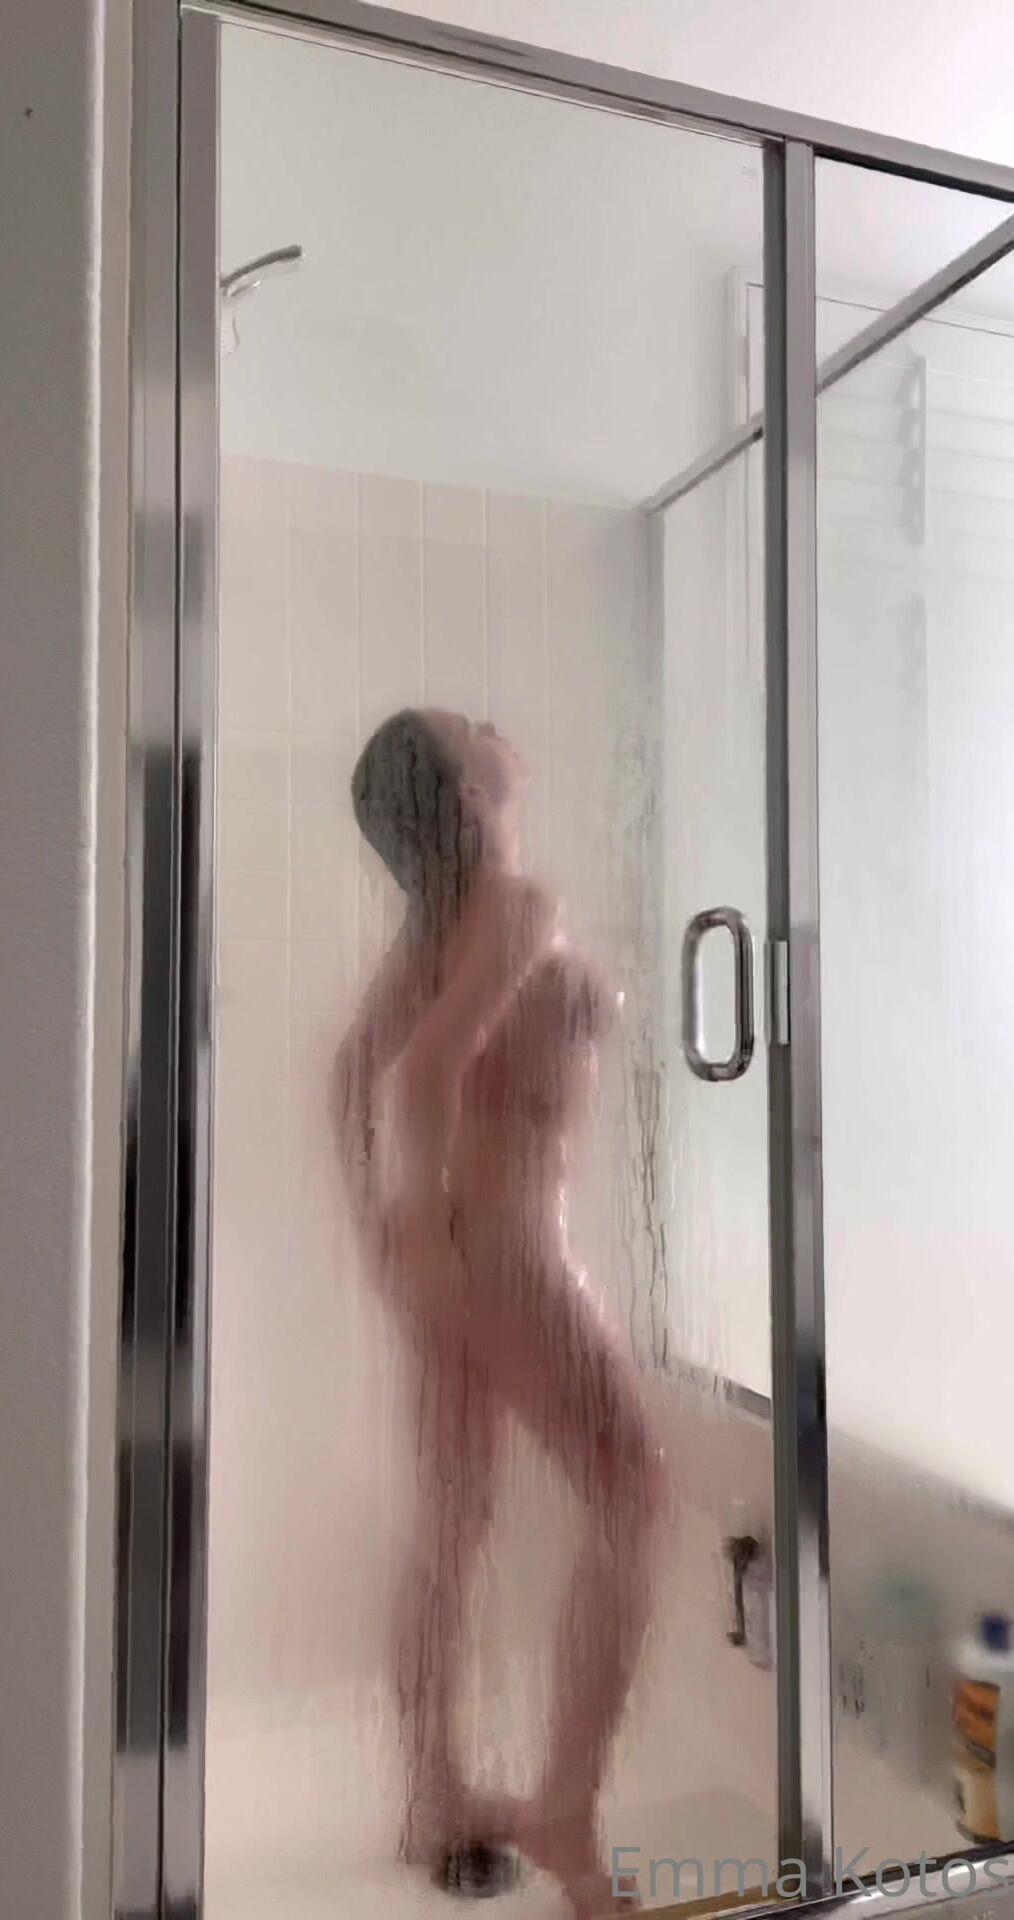 Emma kotos - a glimpse of her pussy in shower